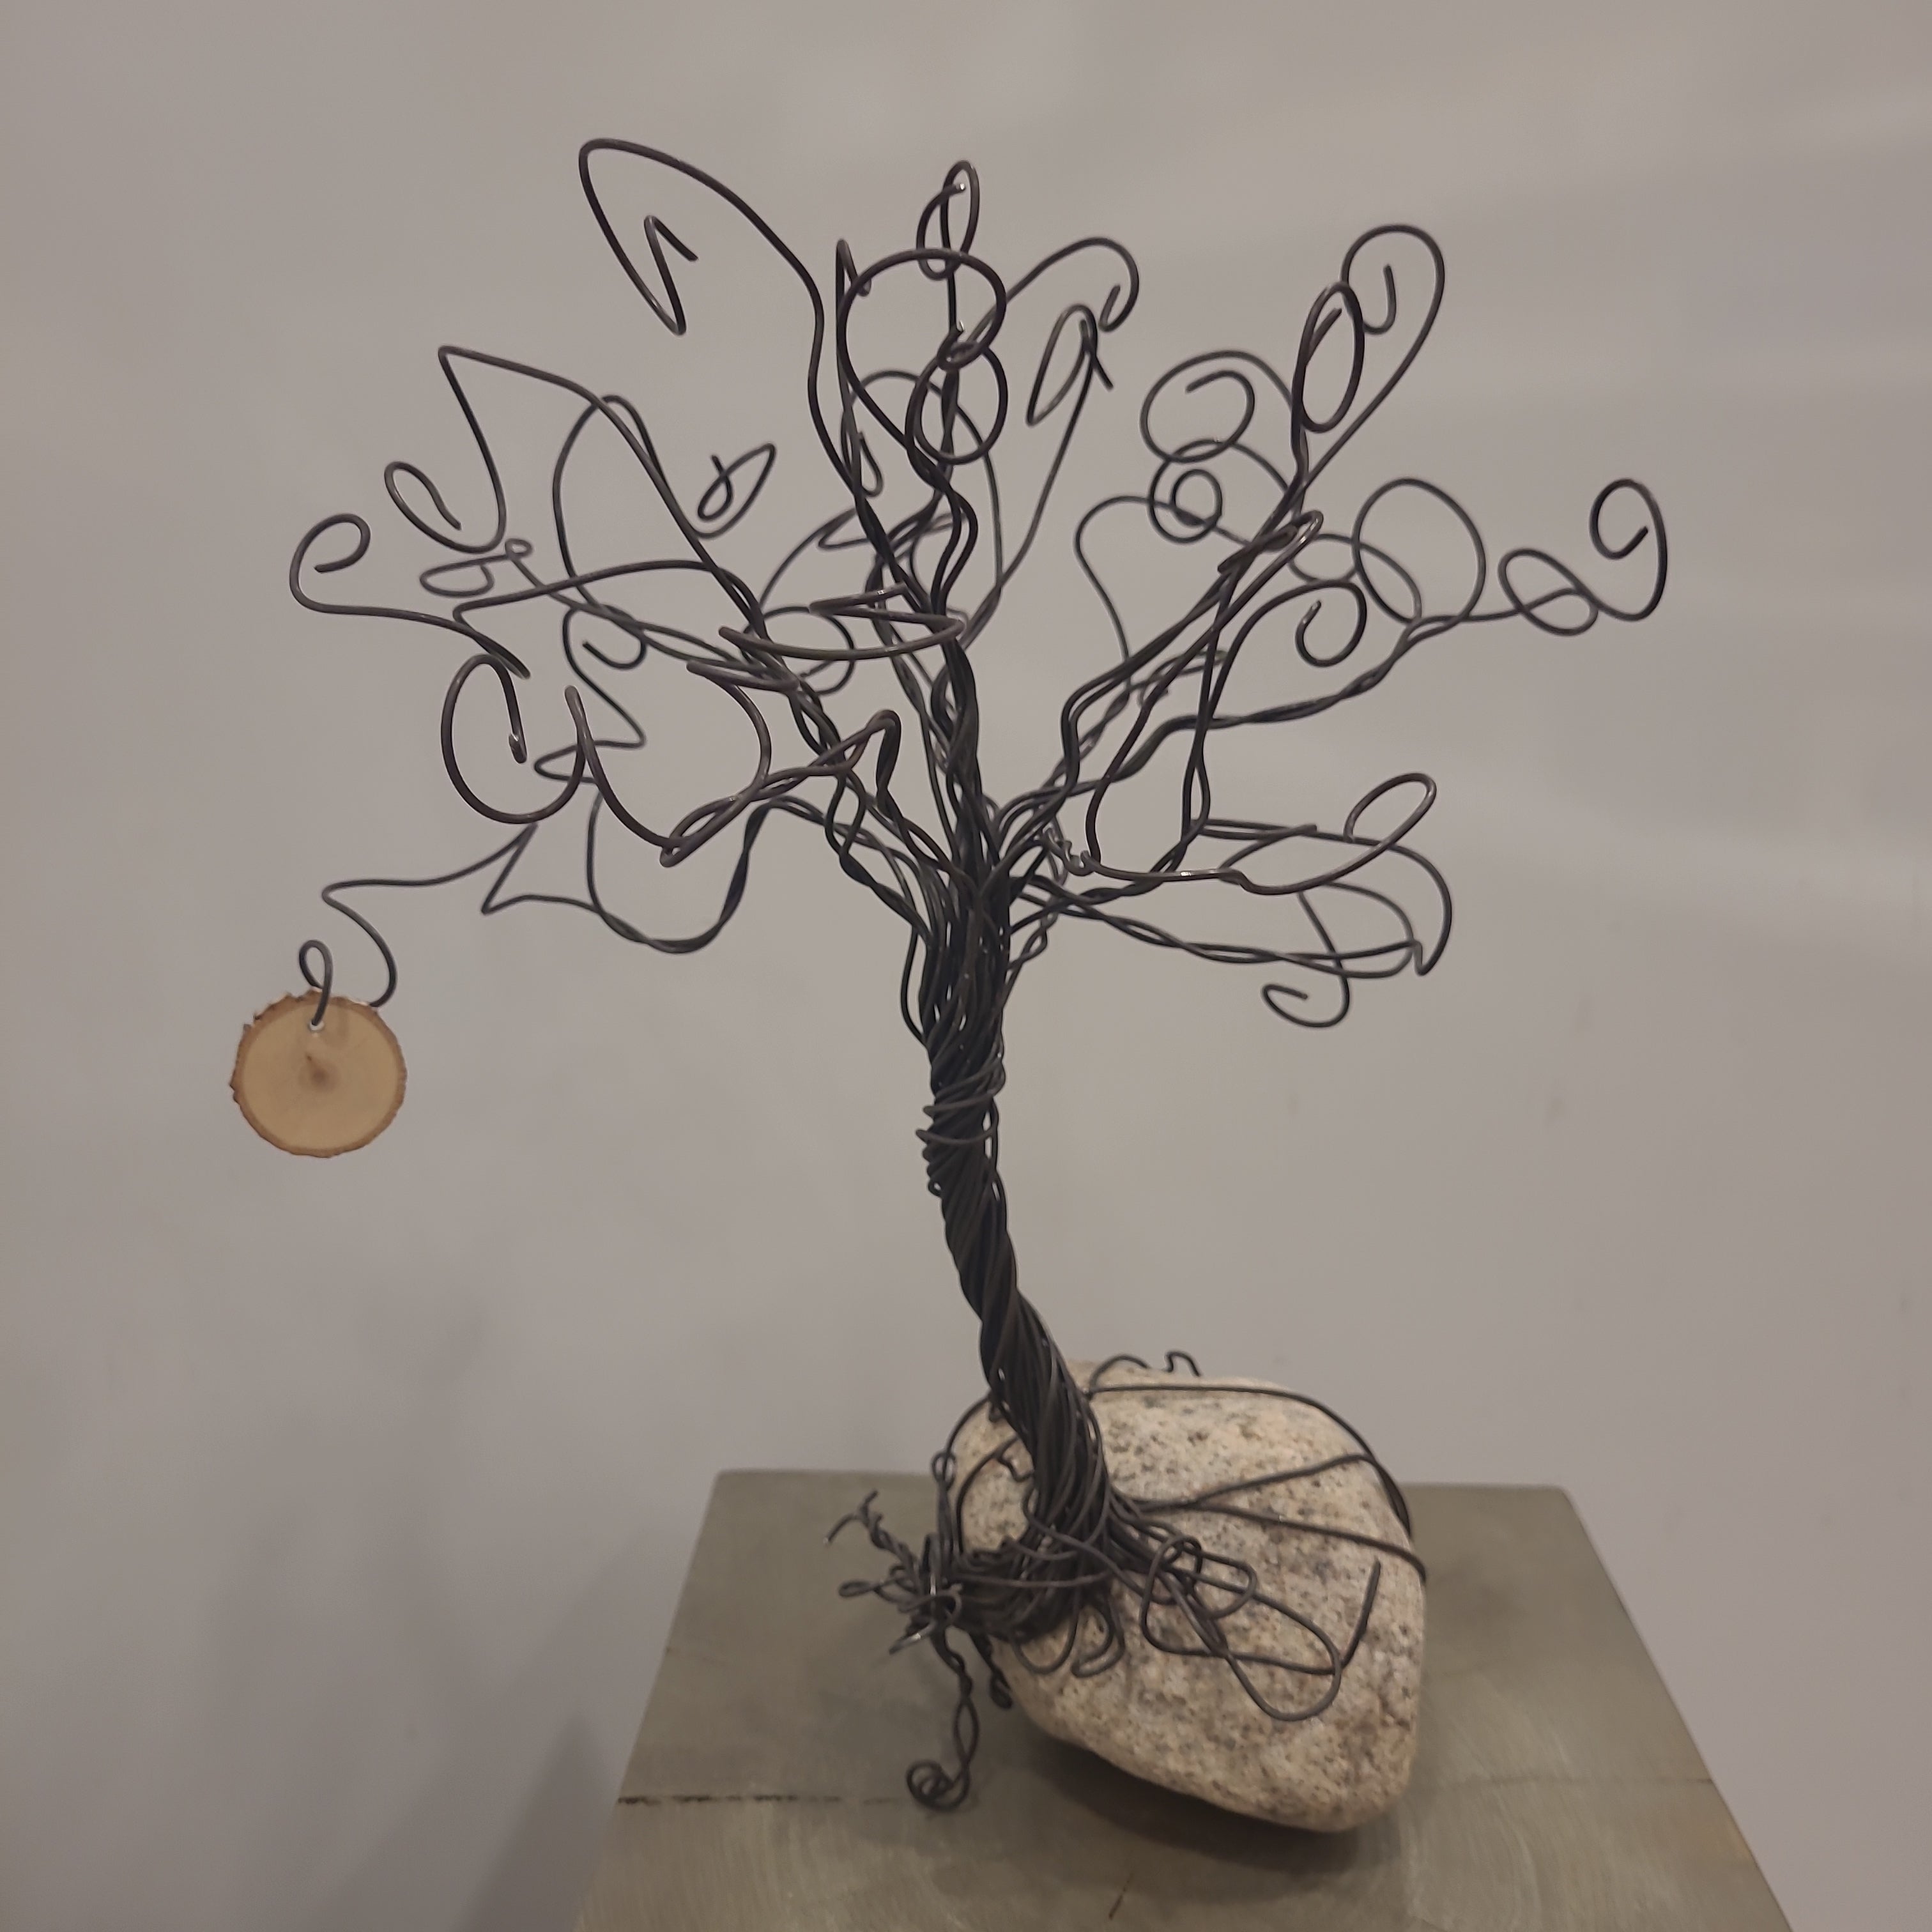 Bent into shape - small wire tree on rock